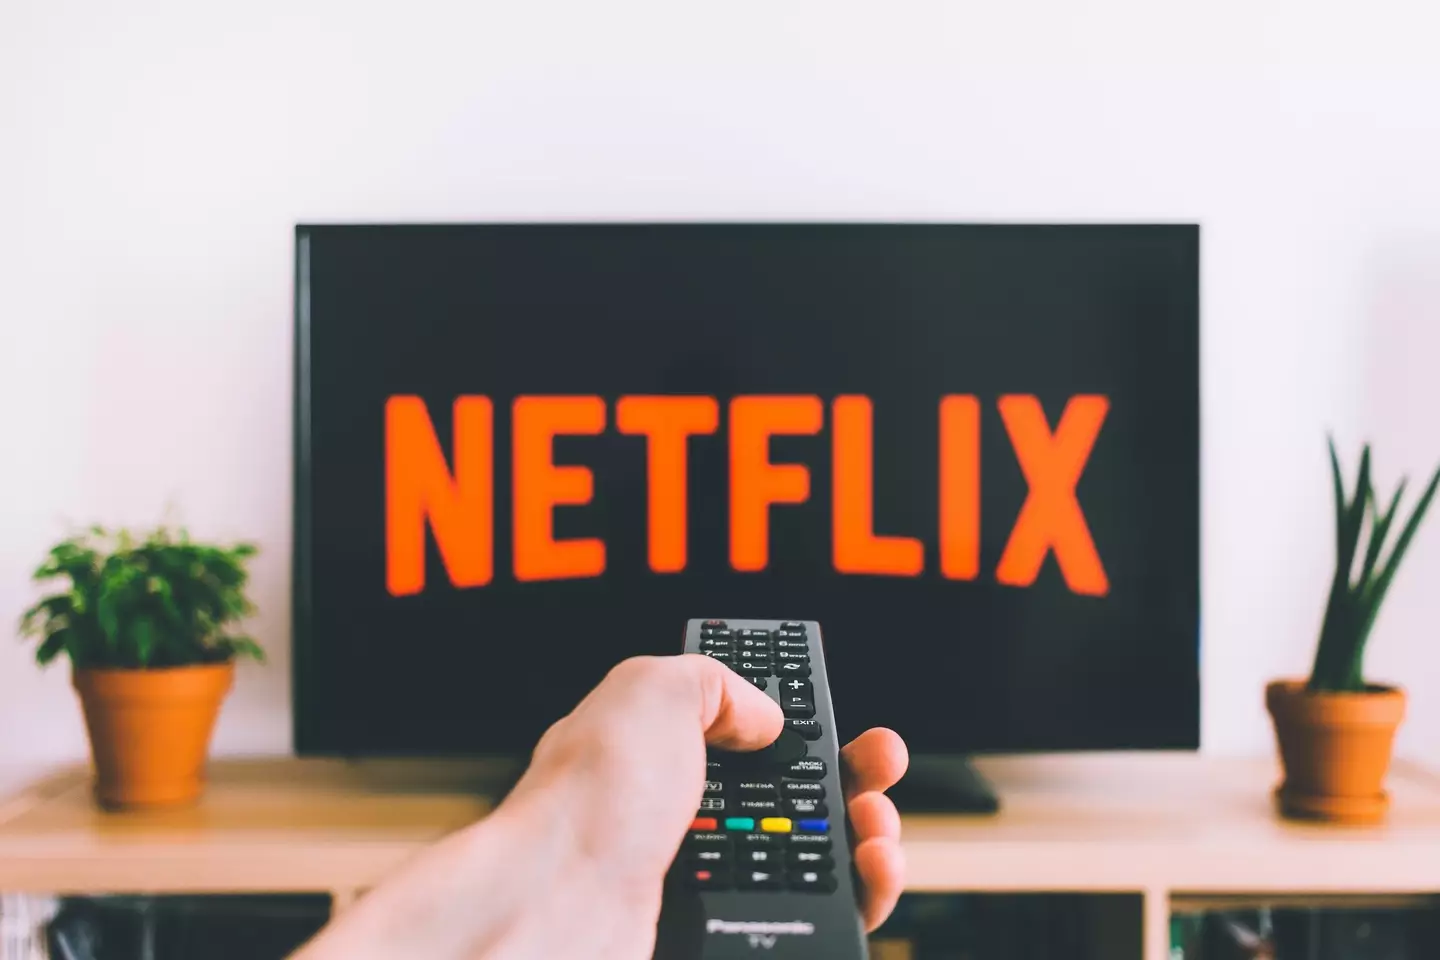 Netflix is introducing ads.